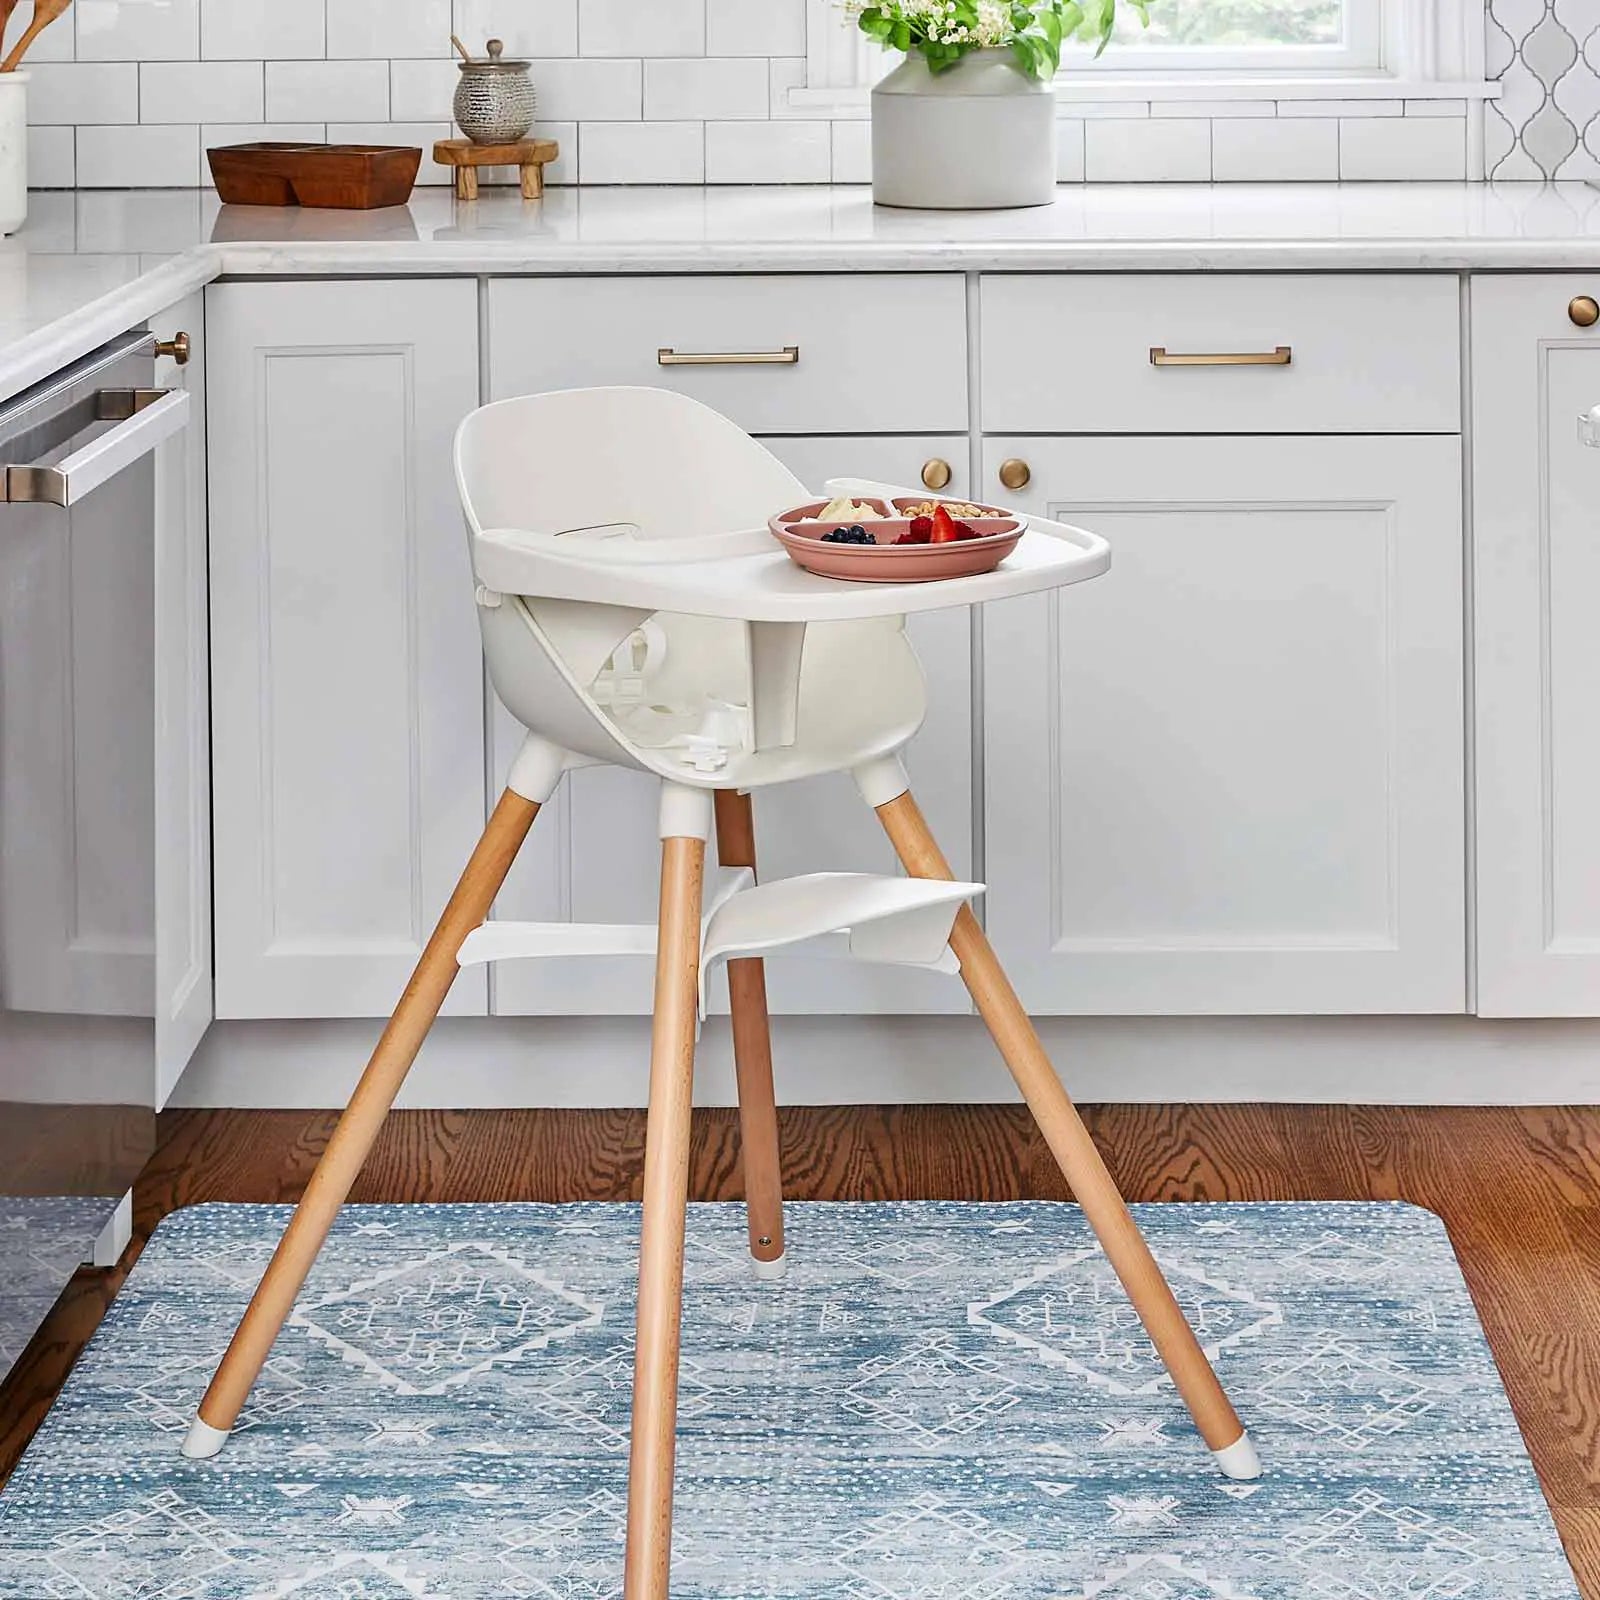 Ula indigo blue and white boho print highchair mat shown in a kitchen under a highchair with a plate of fruit on it